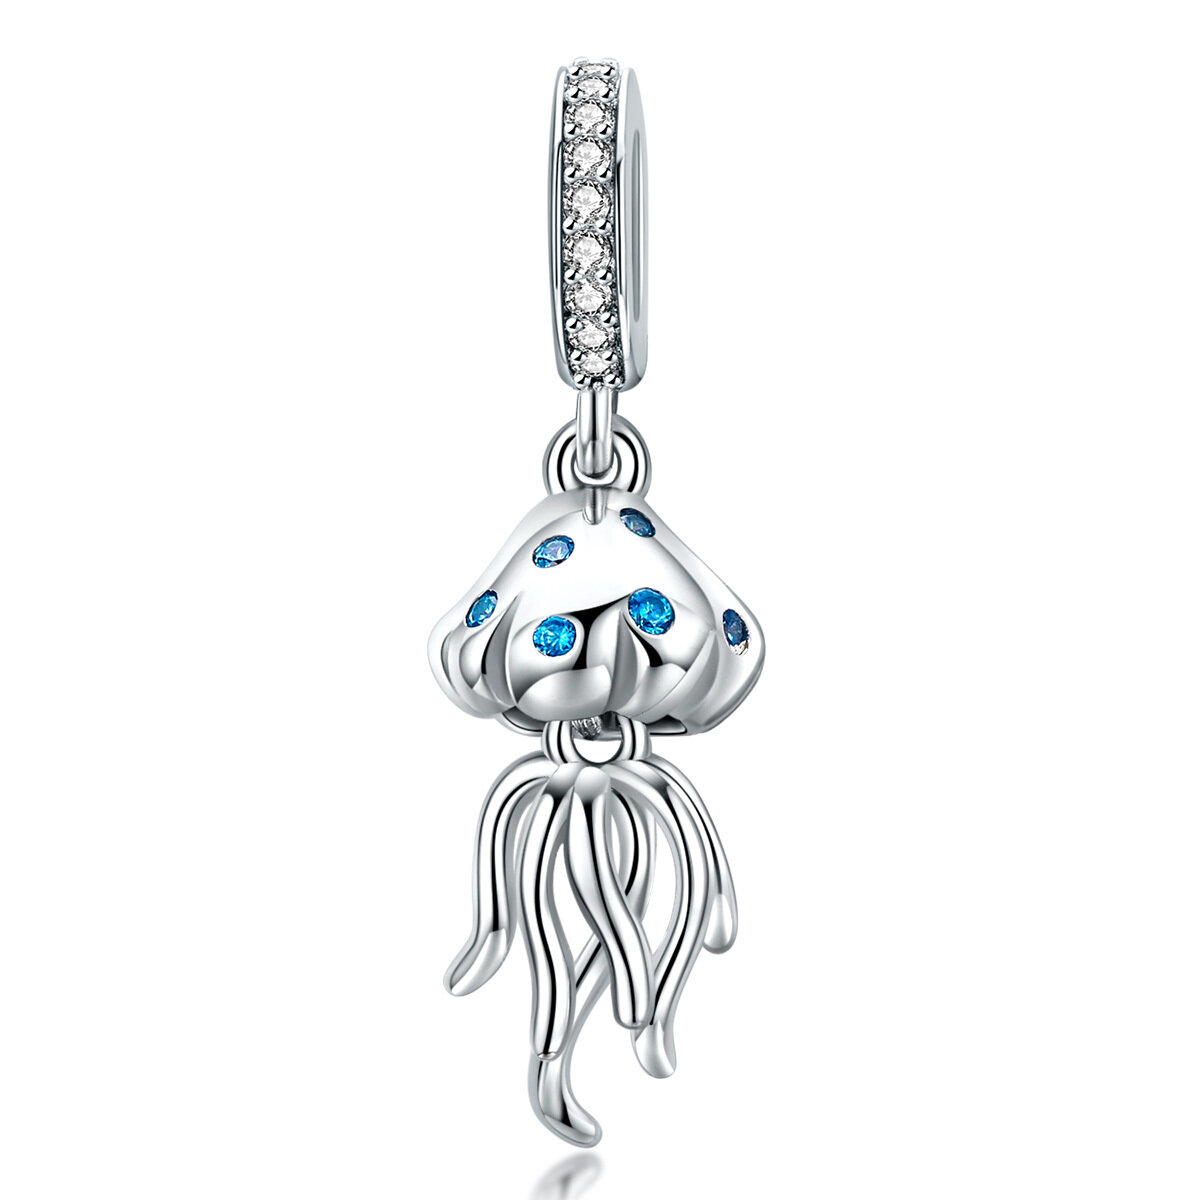 GemKing SCC1297 the Jellyfish S925 Sterling Silver Charm